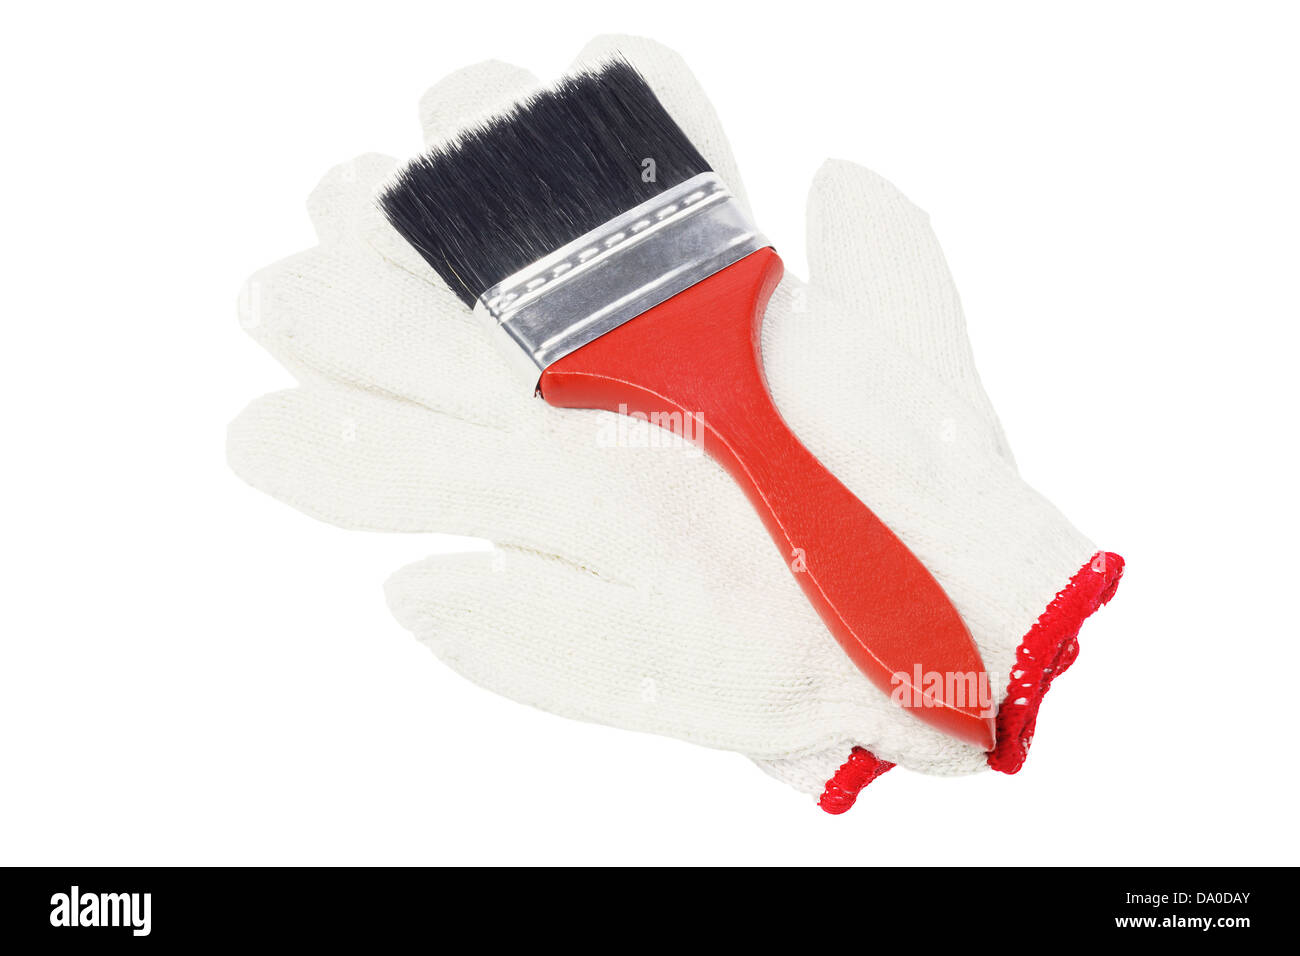 Paint Brush And Cotton Gloves On White Background Stock Photo